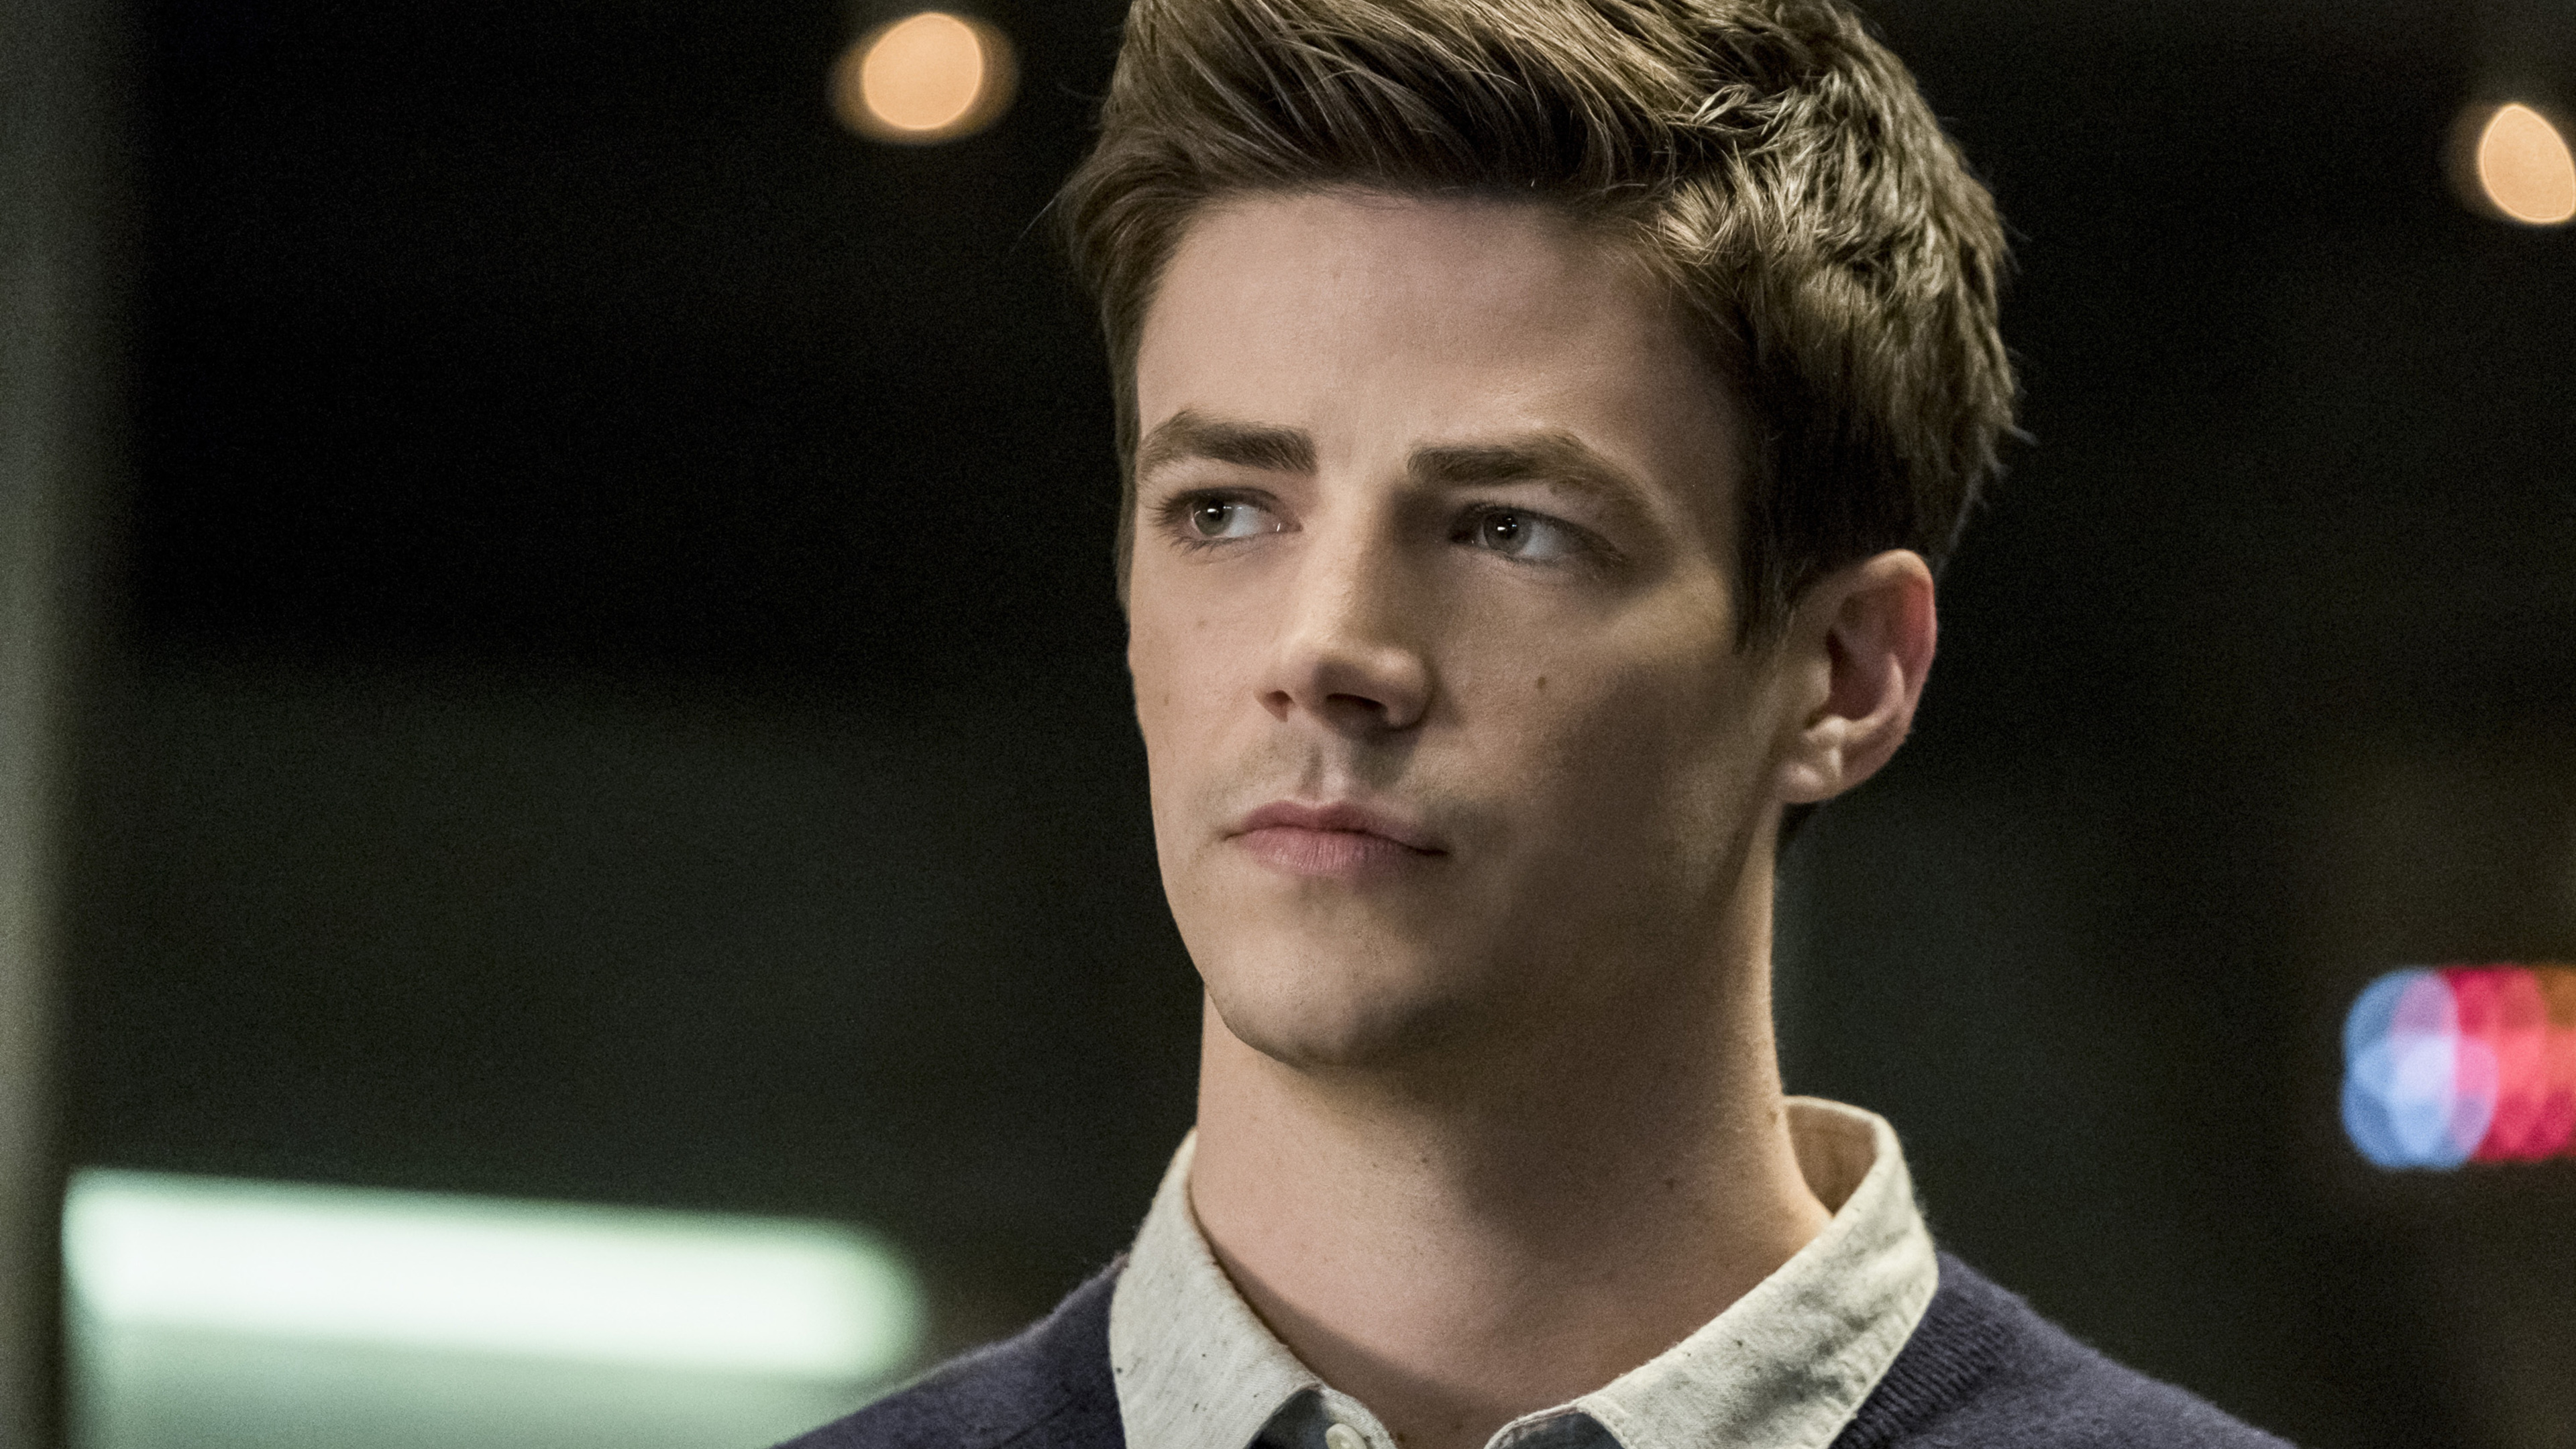 Grant Gustin: An American actor known for his role in TV series The Flash as part of the Arrowverse television franchise. 3840x2160 4K Wallpaper.